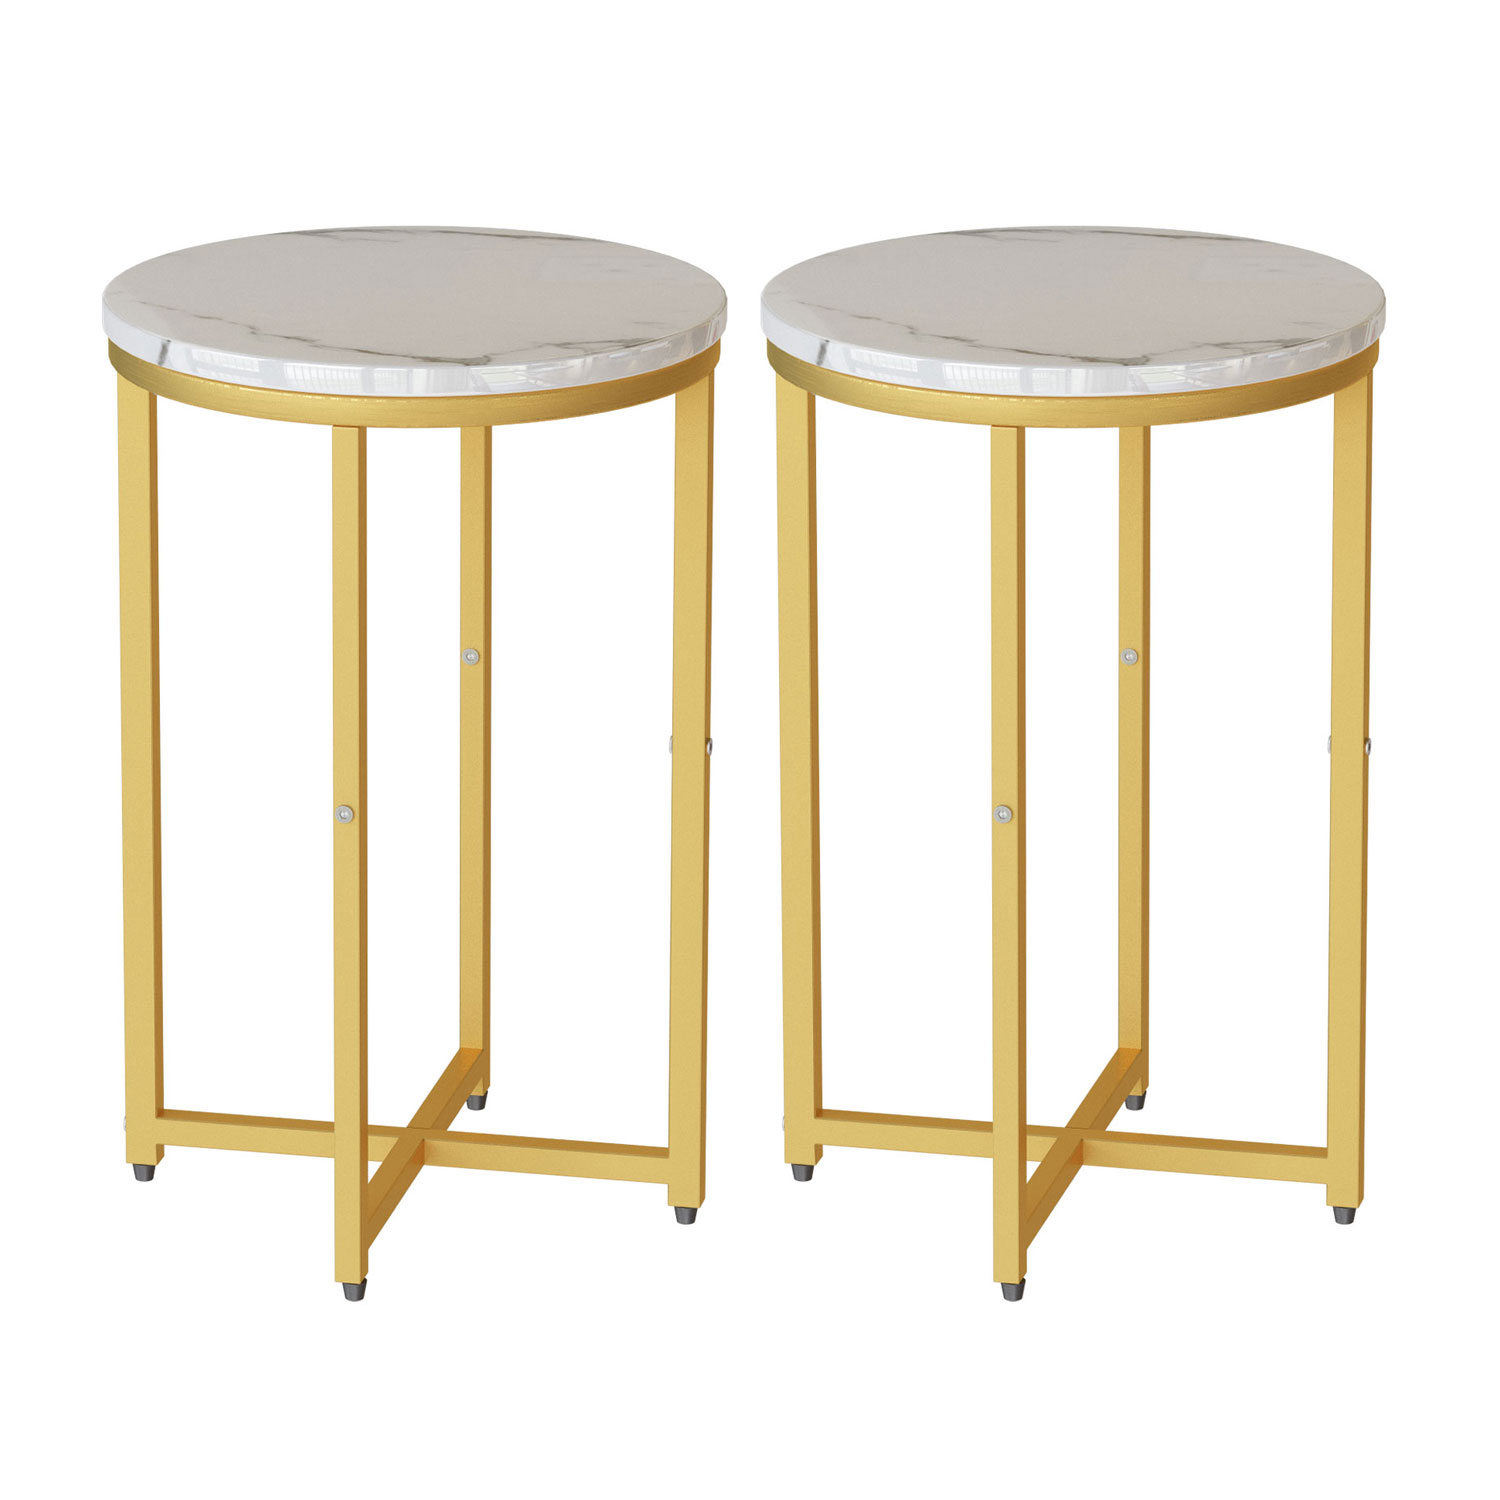 Set of 2 Round End Side Table with Faux Marble Top and Metal Frame for Living Room Bedroom Balcony Small Space Modern Home Decor-Boyel Living